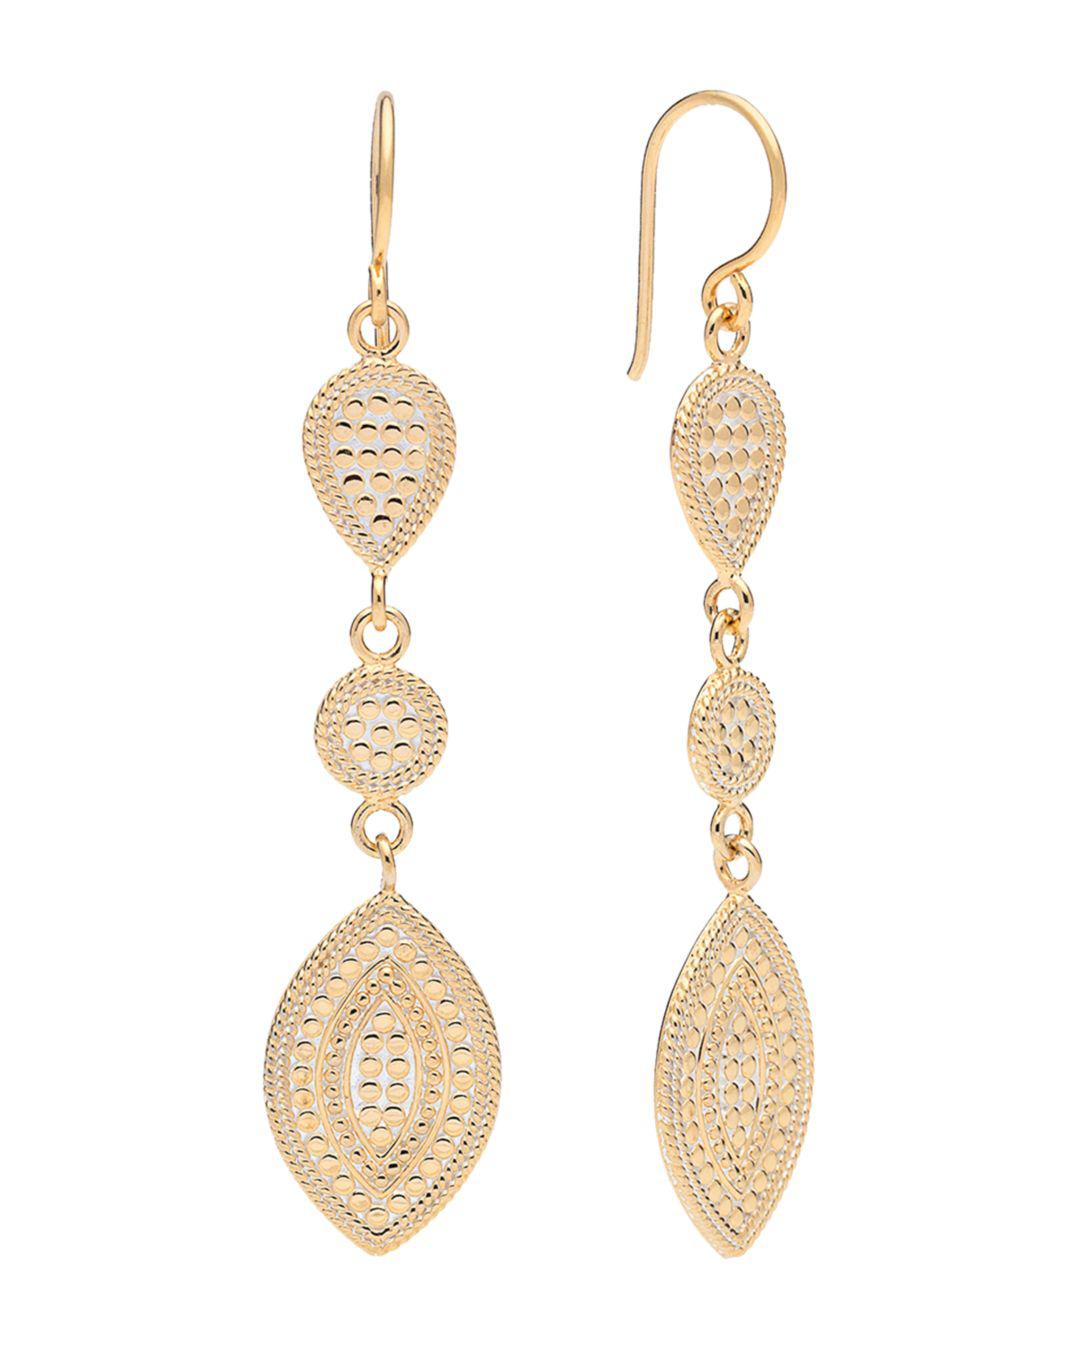 Lyst - Anna Beck Marquise Drop Earrings In 18k Gold-plated Sterling ...